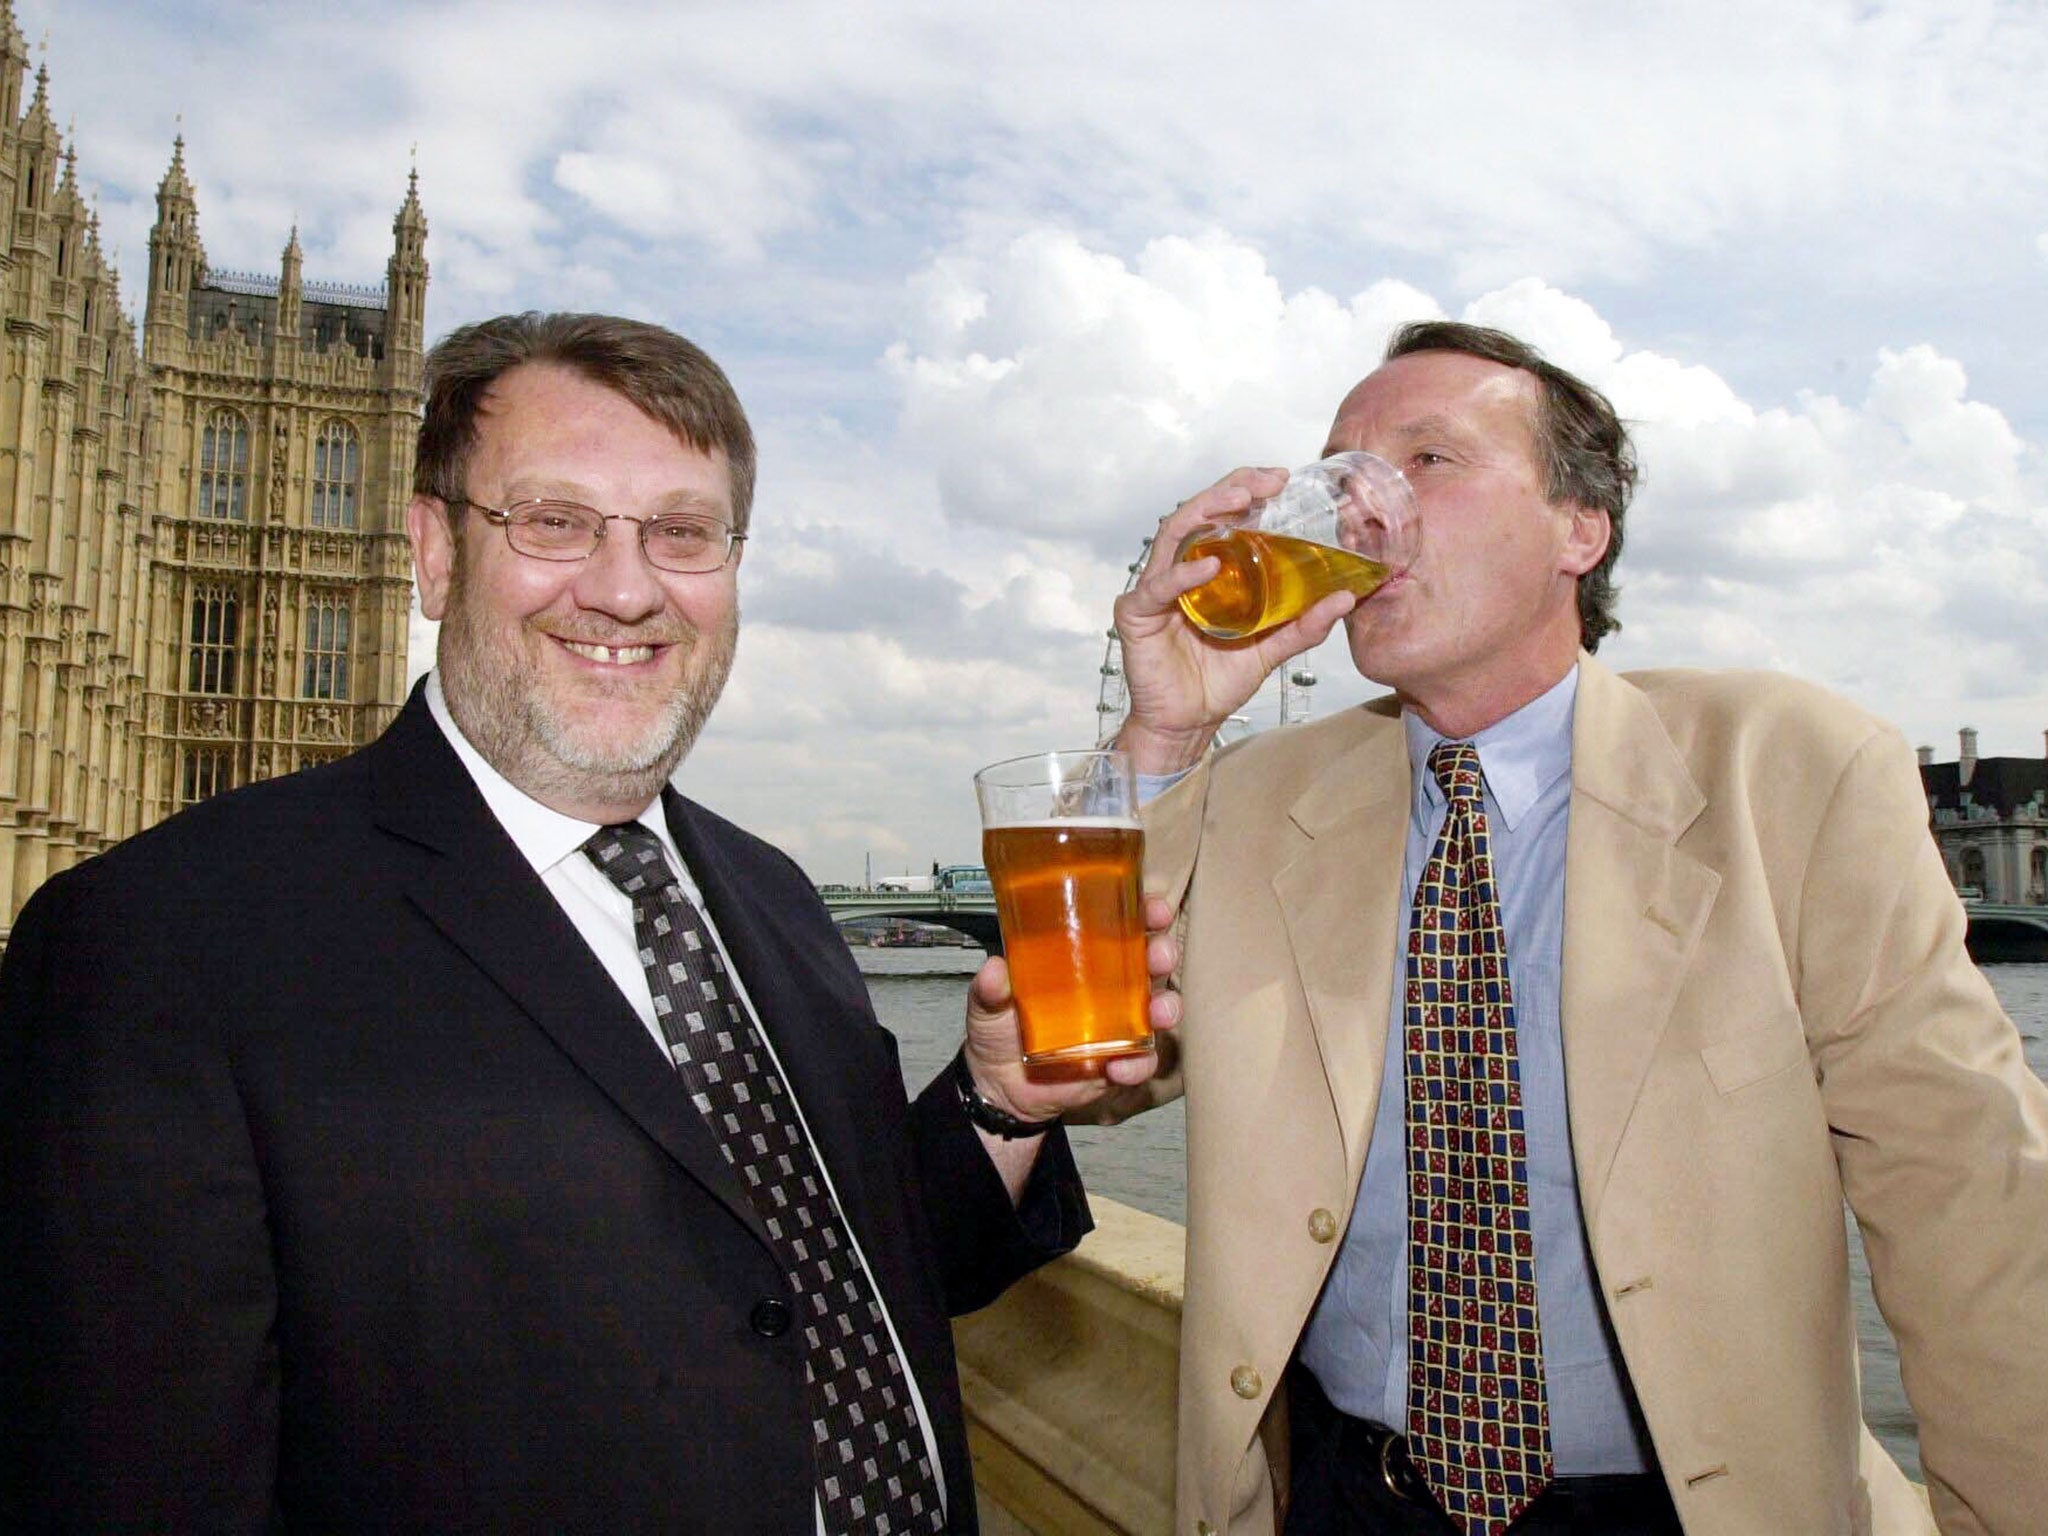 MP for Doncaster North Kevin Hughes (left) and Geoff Brown owner of Glentworth brewery enjoy a pint of Glentworth Brewery's Danum Goldon on the terrace at The House of Commons